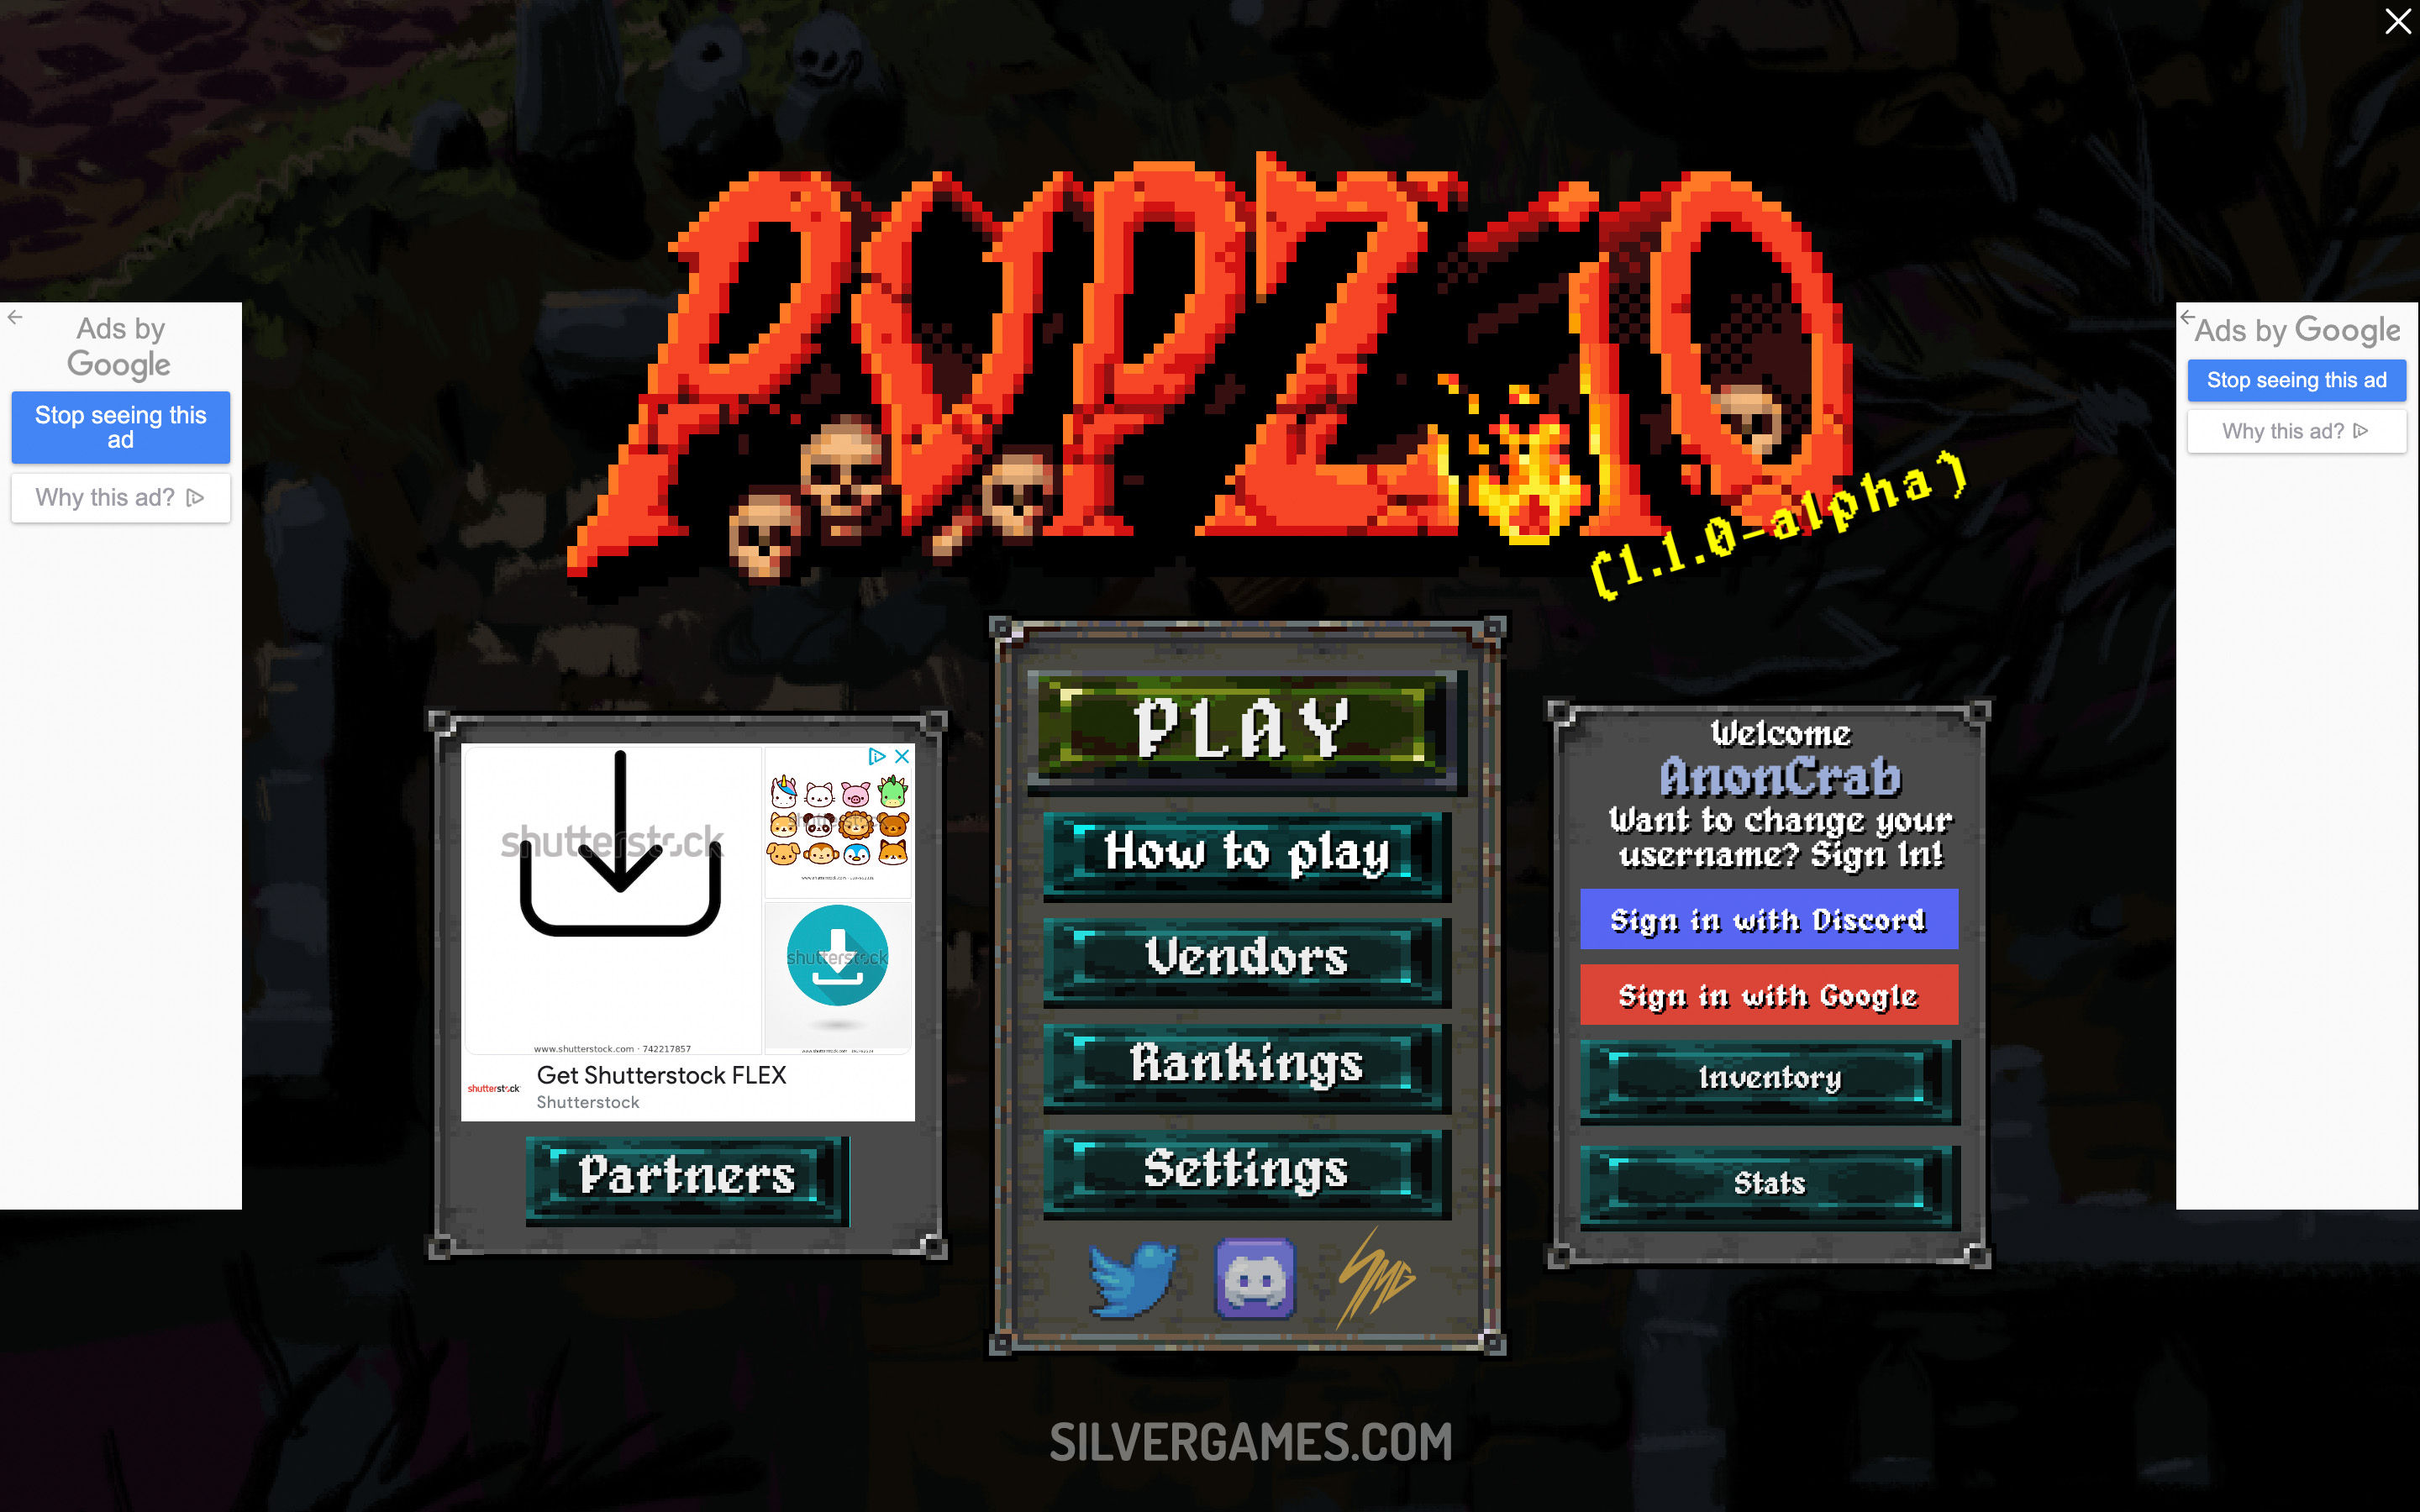 PvPz.io — Loot Your Friends